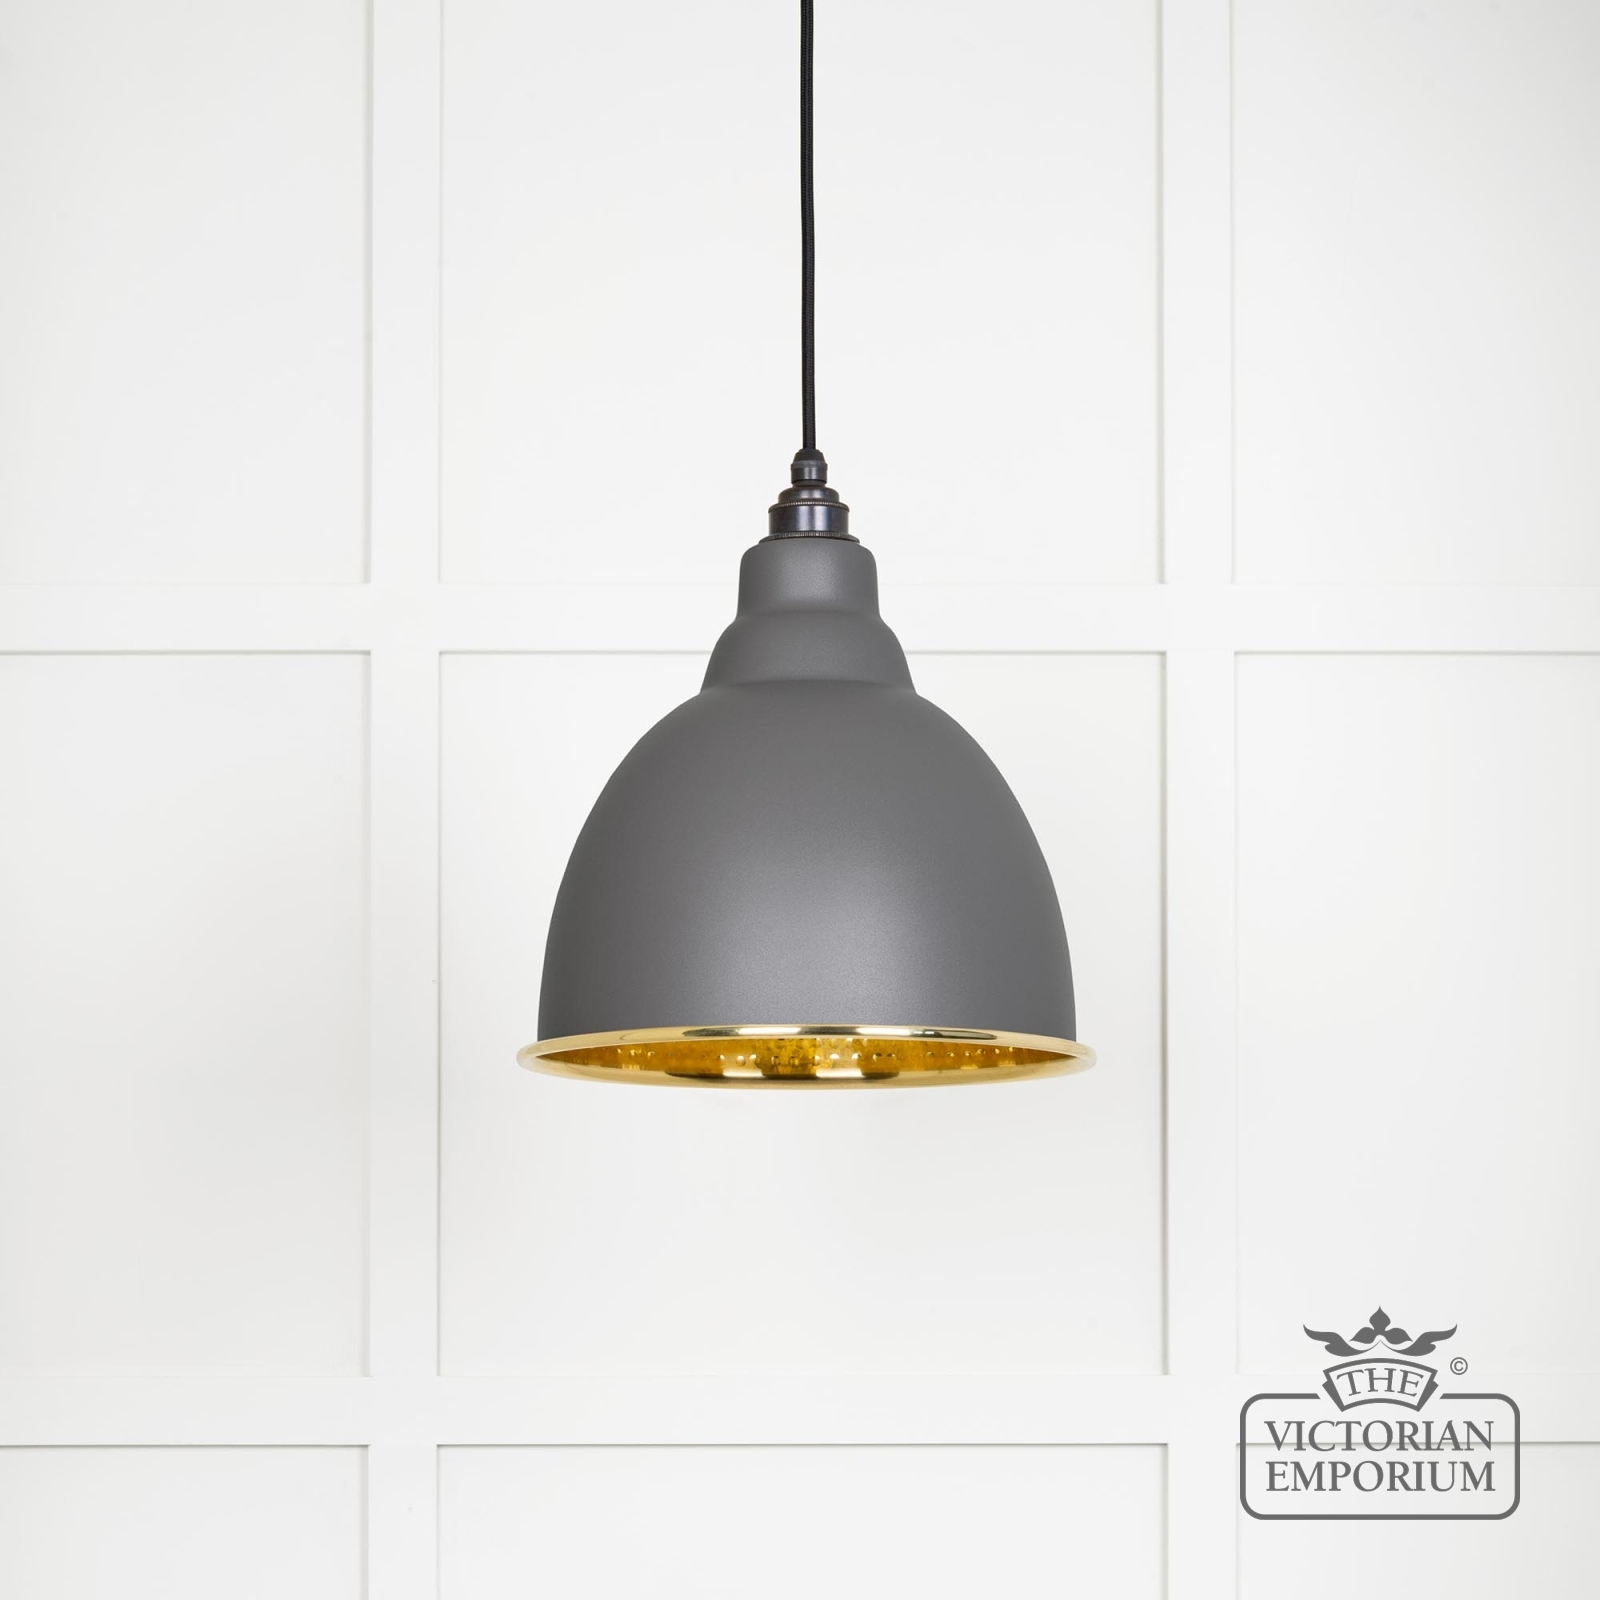 Brindle pendant light in Bluff with hammered brass interior